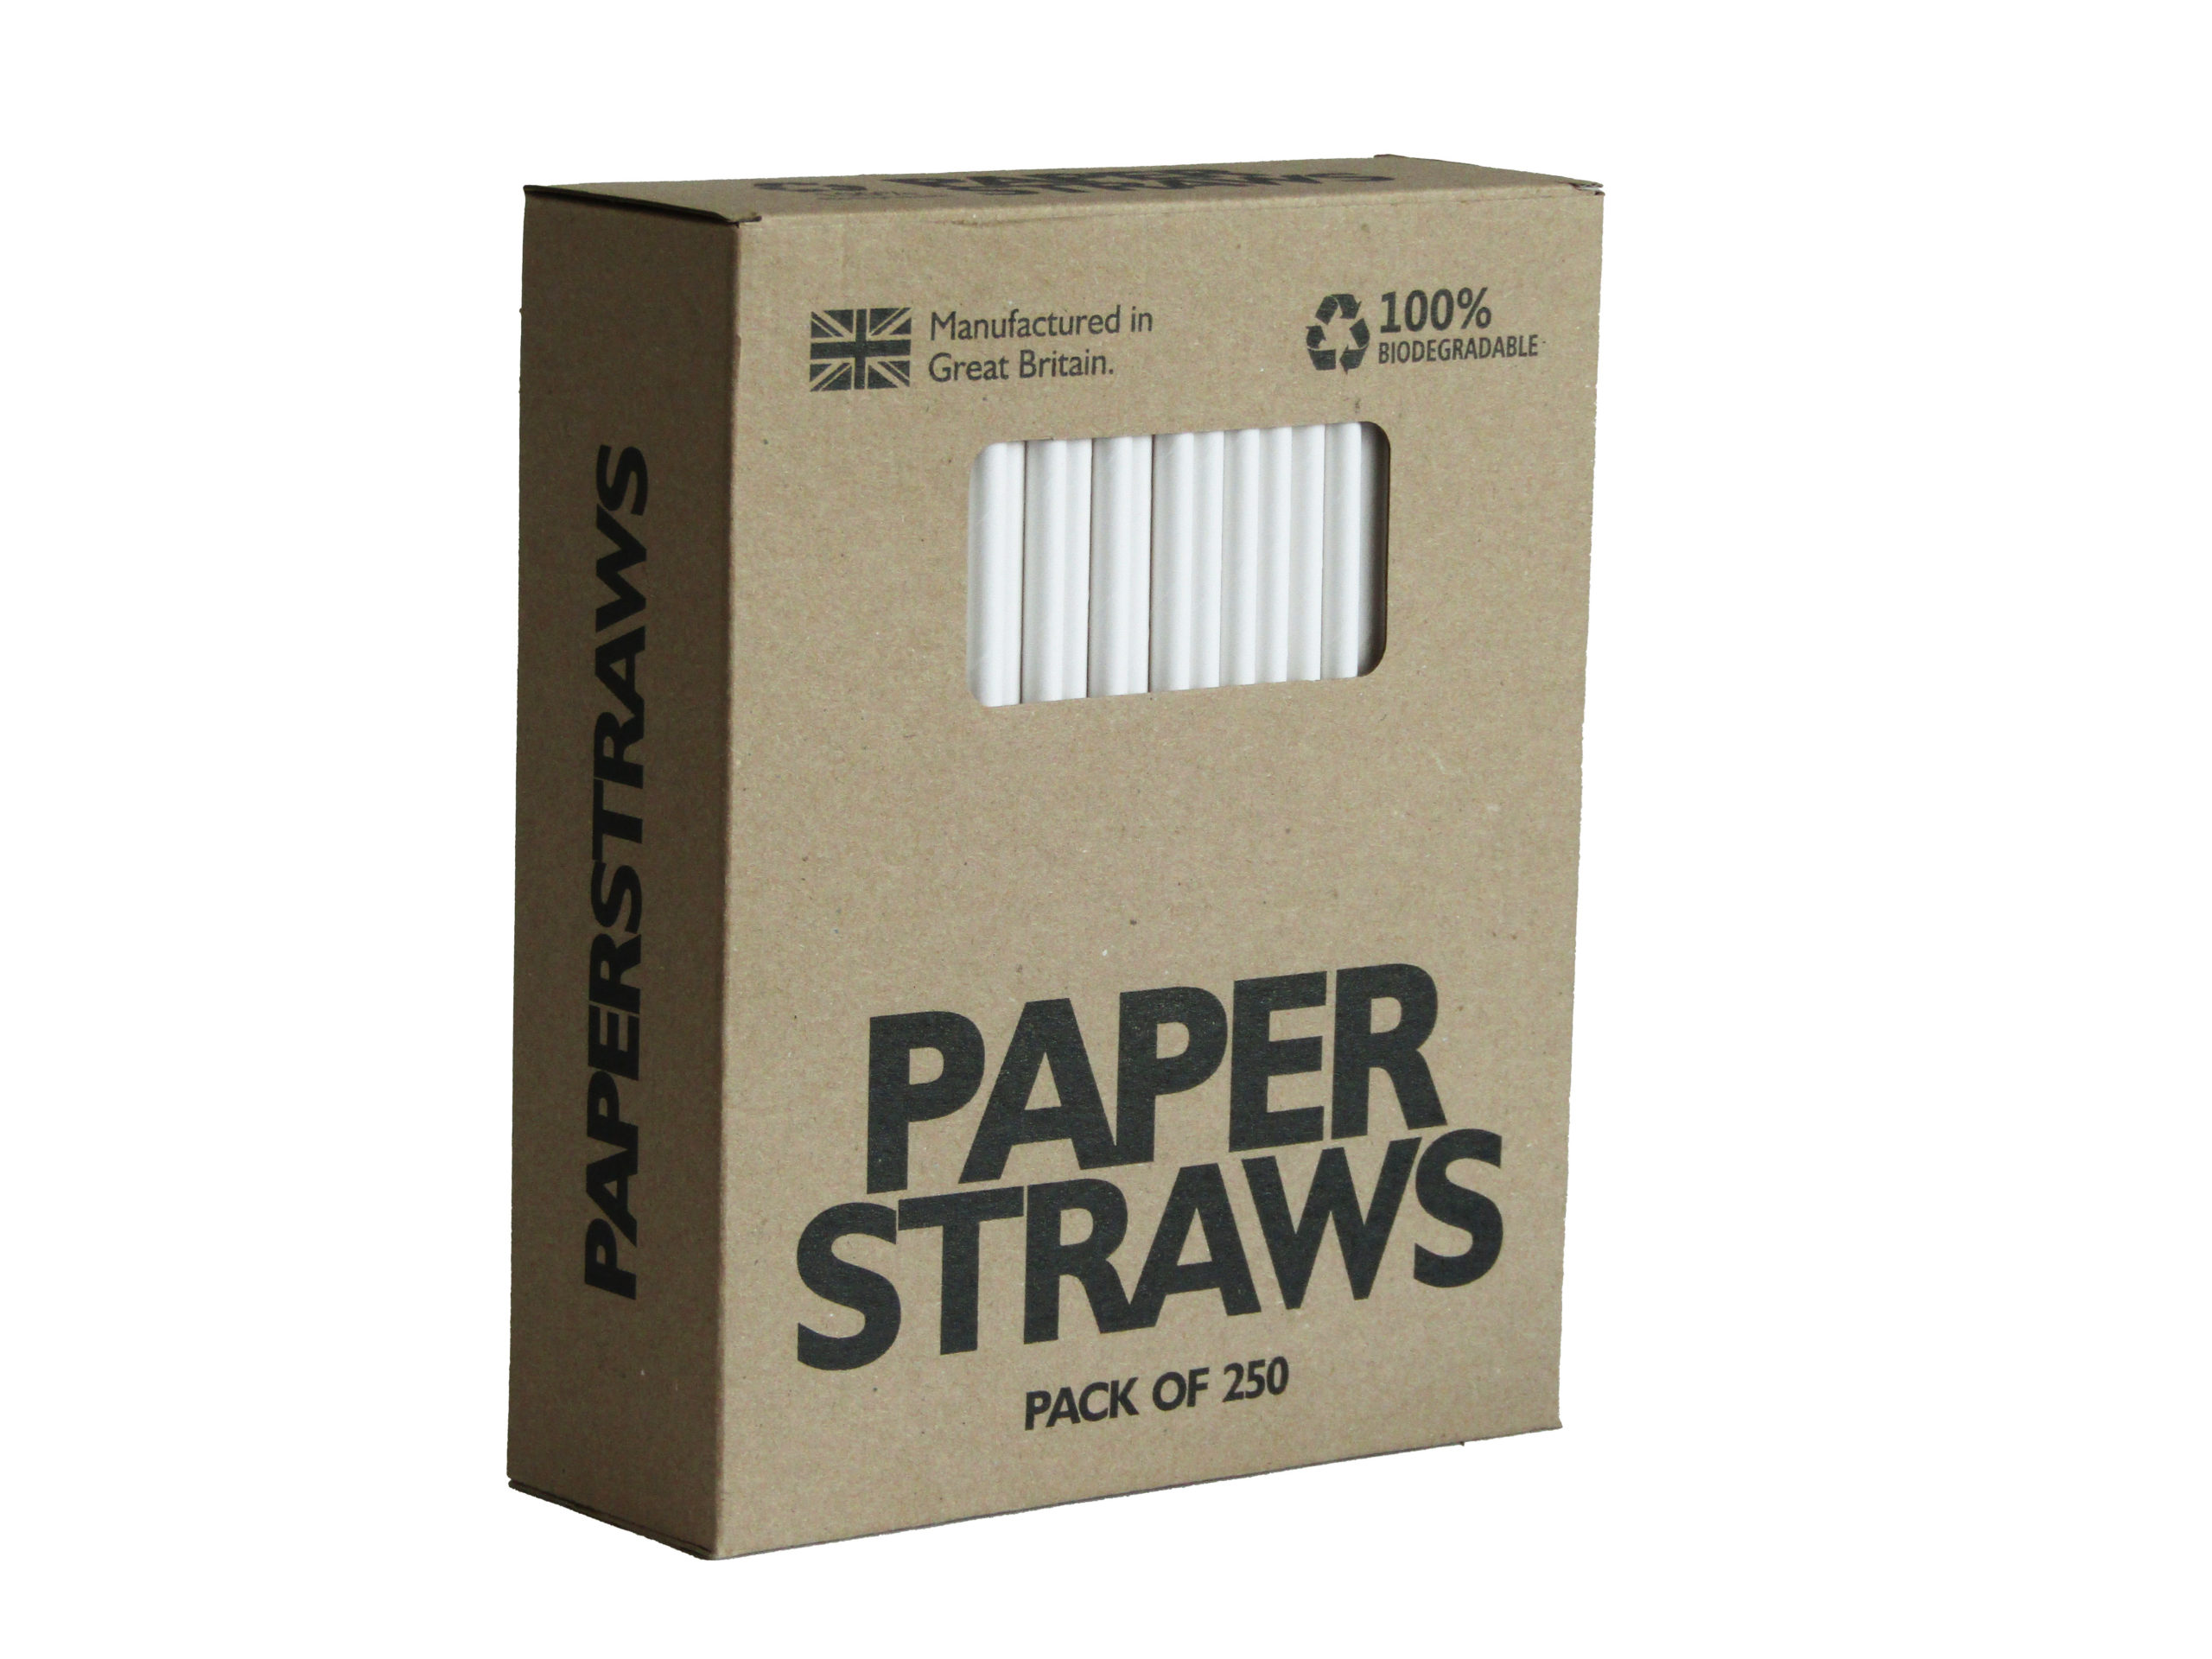 8" Red & White Striped Paper Drinking Straws Biodegradable Boxes of 250 